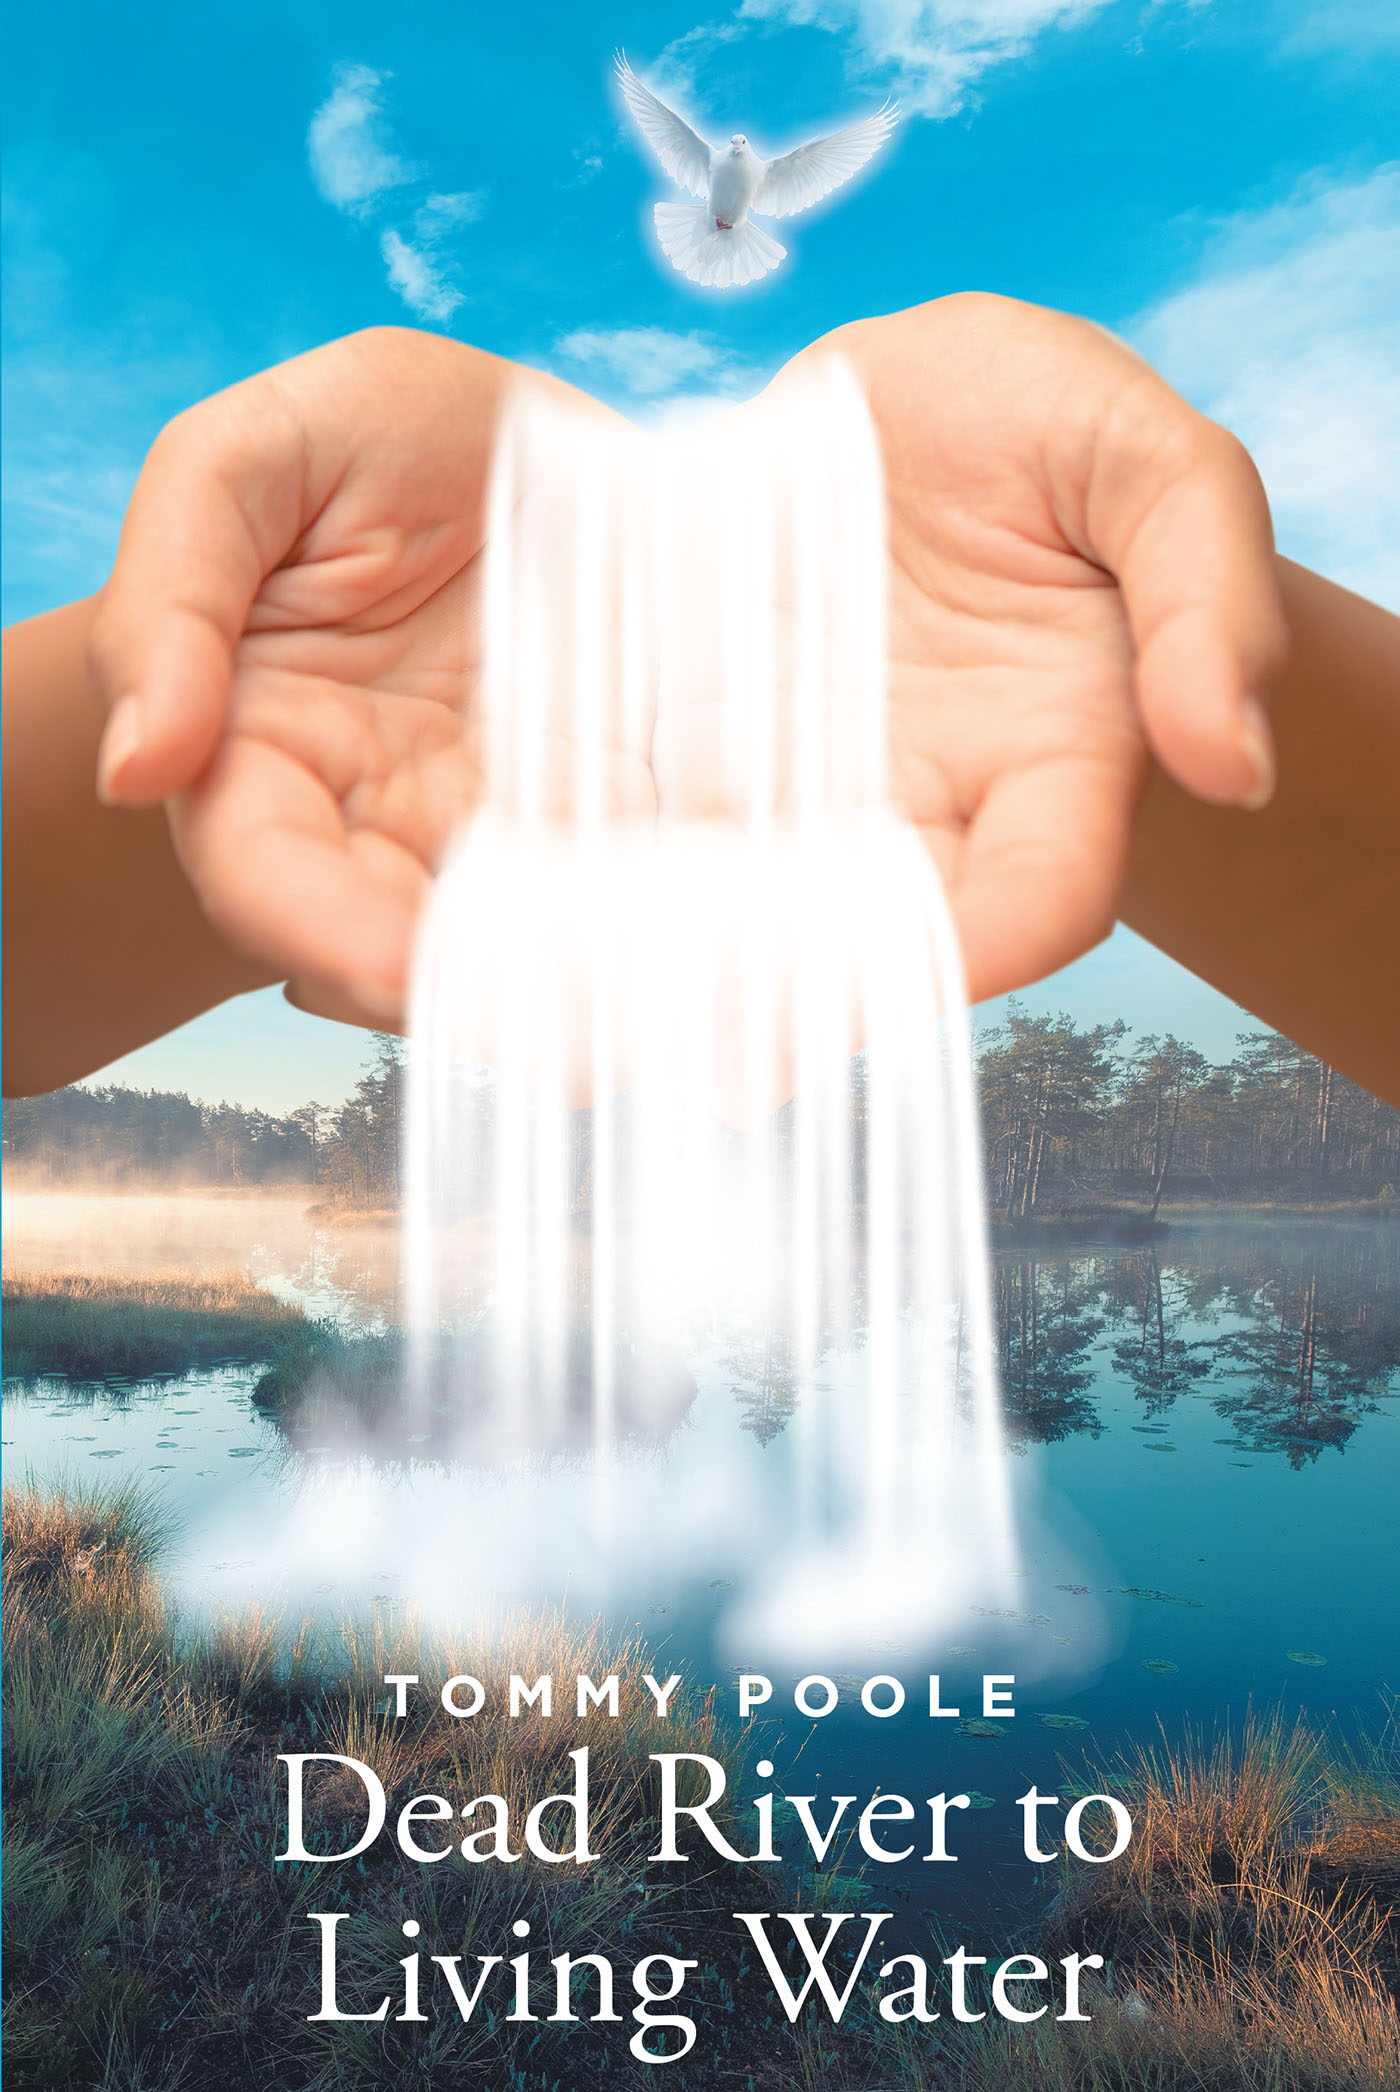 Tommy Poole’s New Book, "Dead River to Living Water," is a Faith-Based Read That Reveals How Salvation is Available for Anyone Who Follows in the Lord's Divine Light